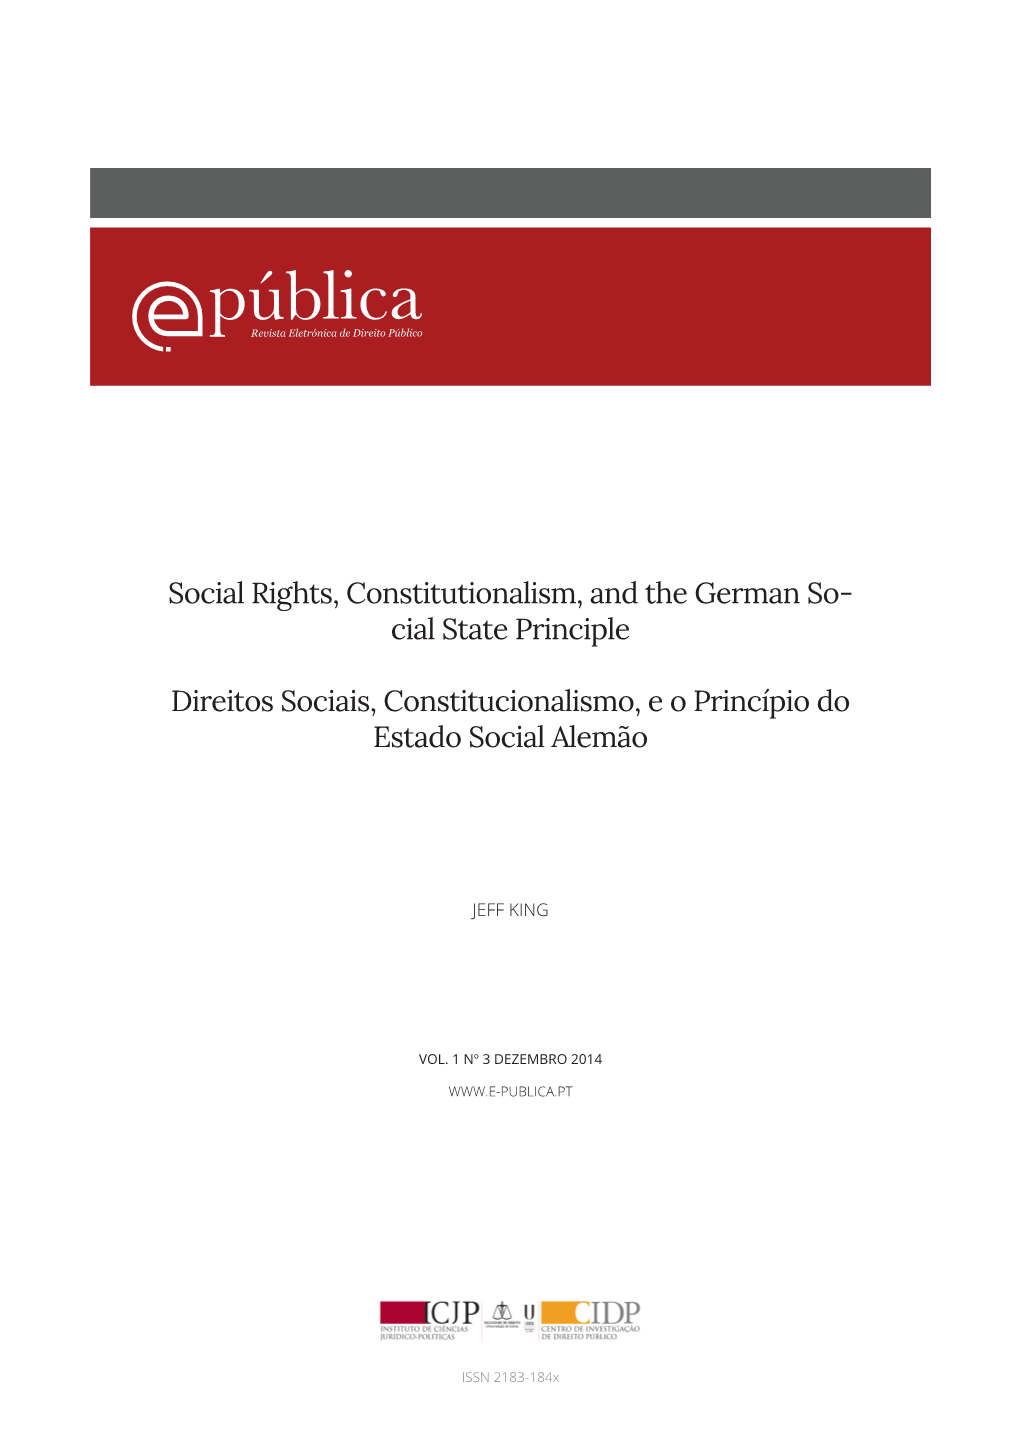 Social Rights, Constitutionalism, and the German So- Cial State Principle